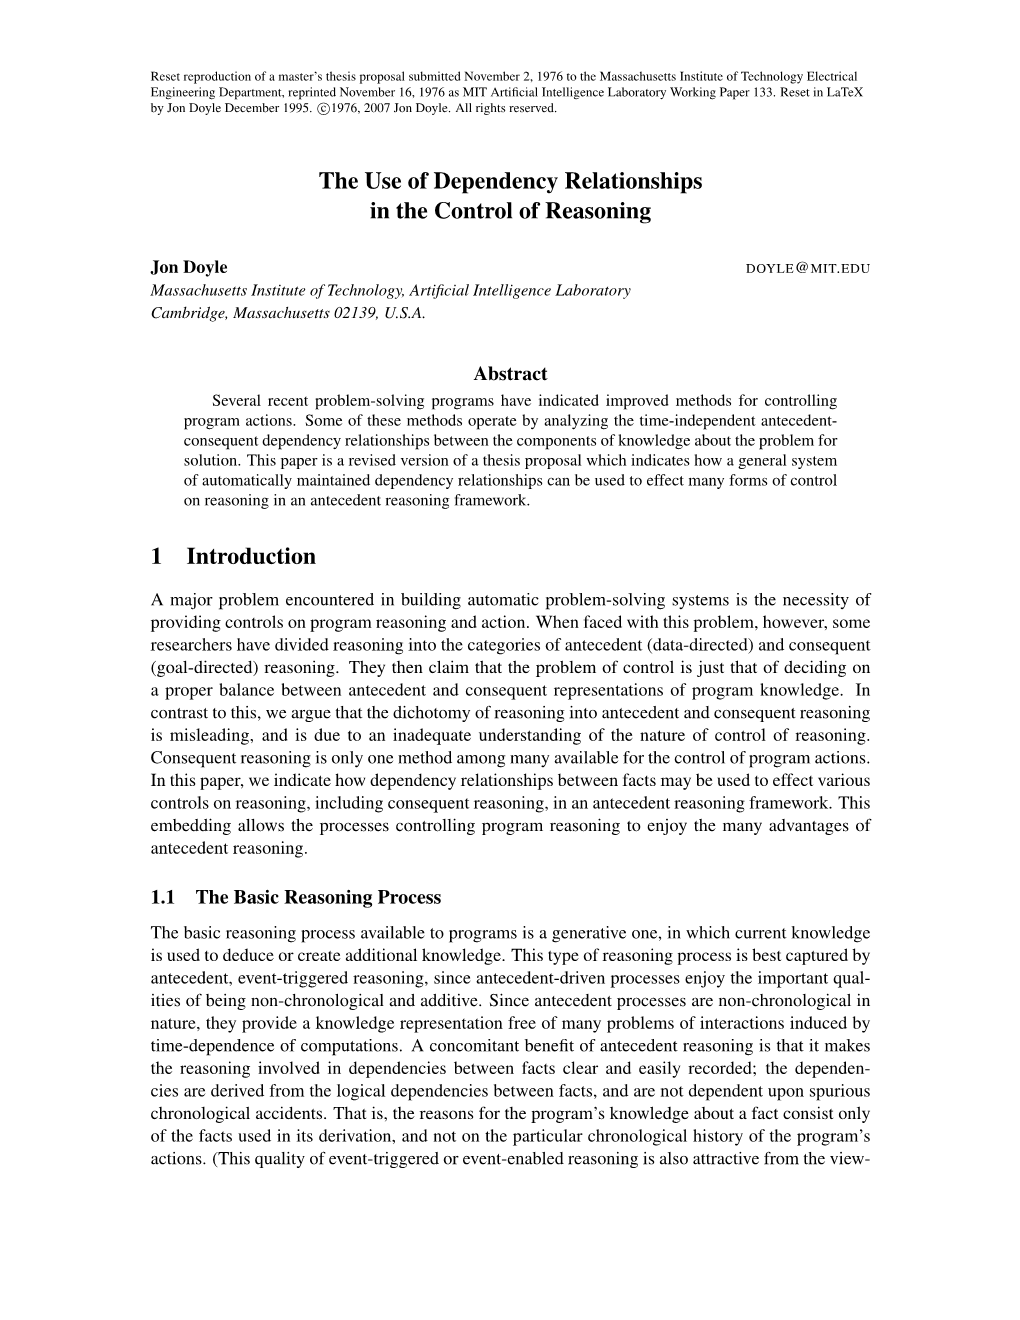 The Use of Dependency Relationships in the Control of Reasoning 1 Introduction